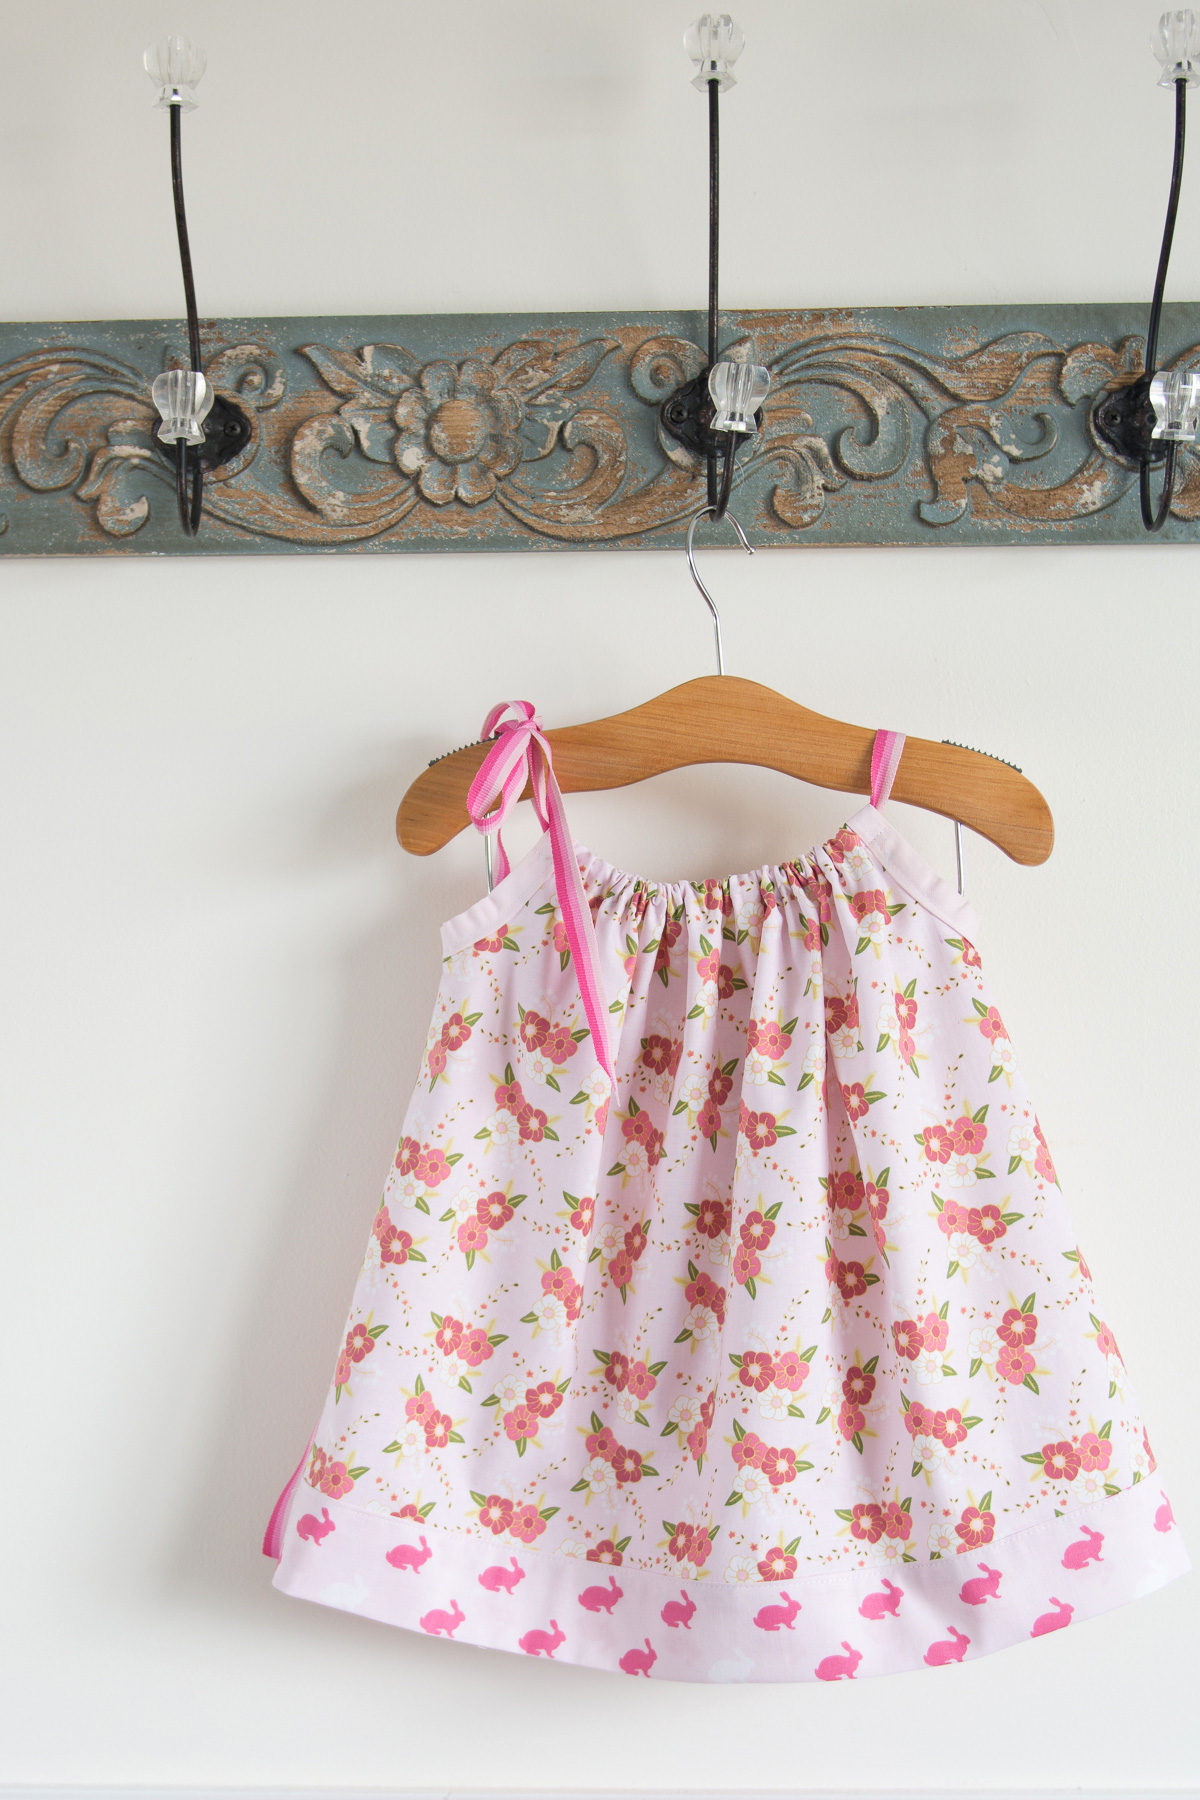 Simple pillowcase dress sewing tutorial by Melissa Mortenson of polkadotchair.com - includes measurements for multiple sizes